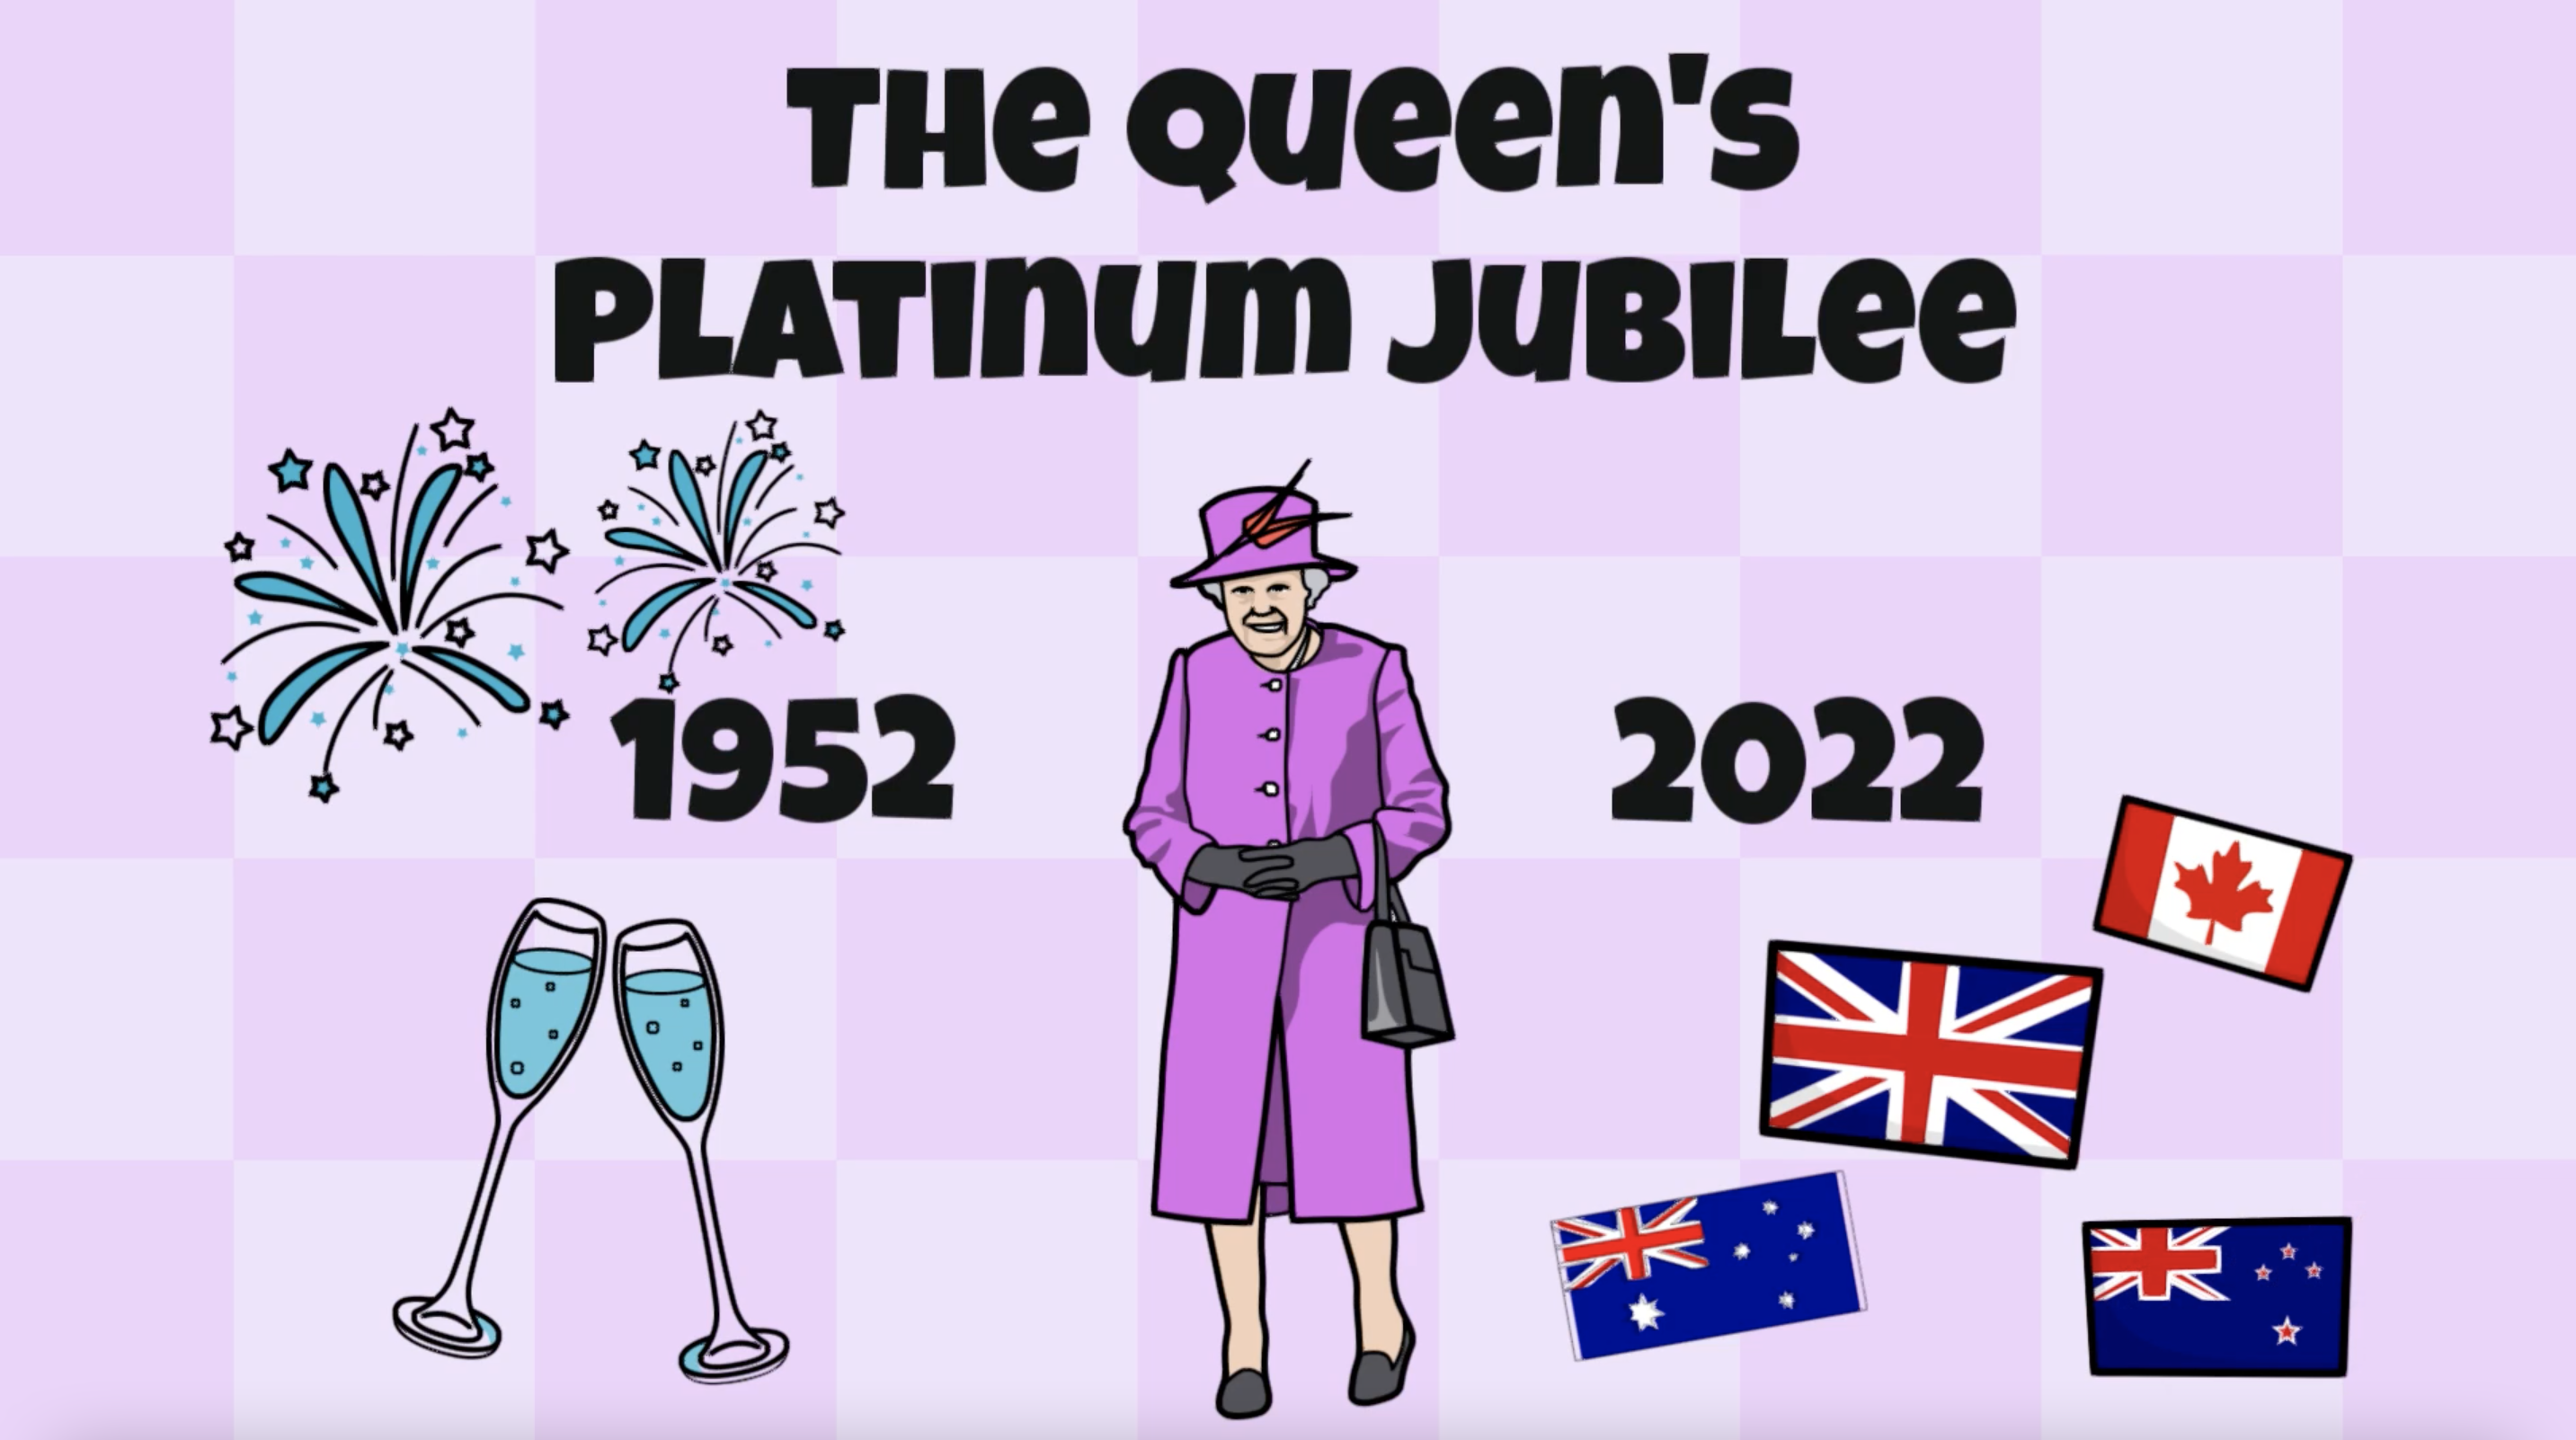 Is the Queen the longest-reigning monarch in history?